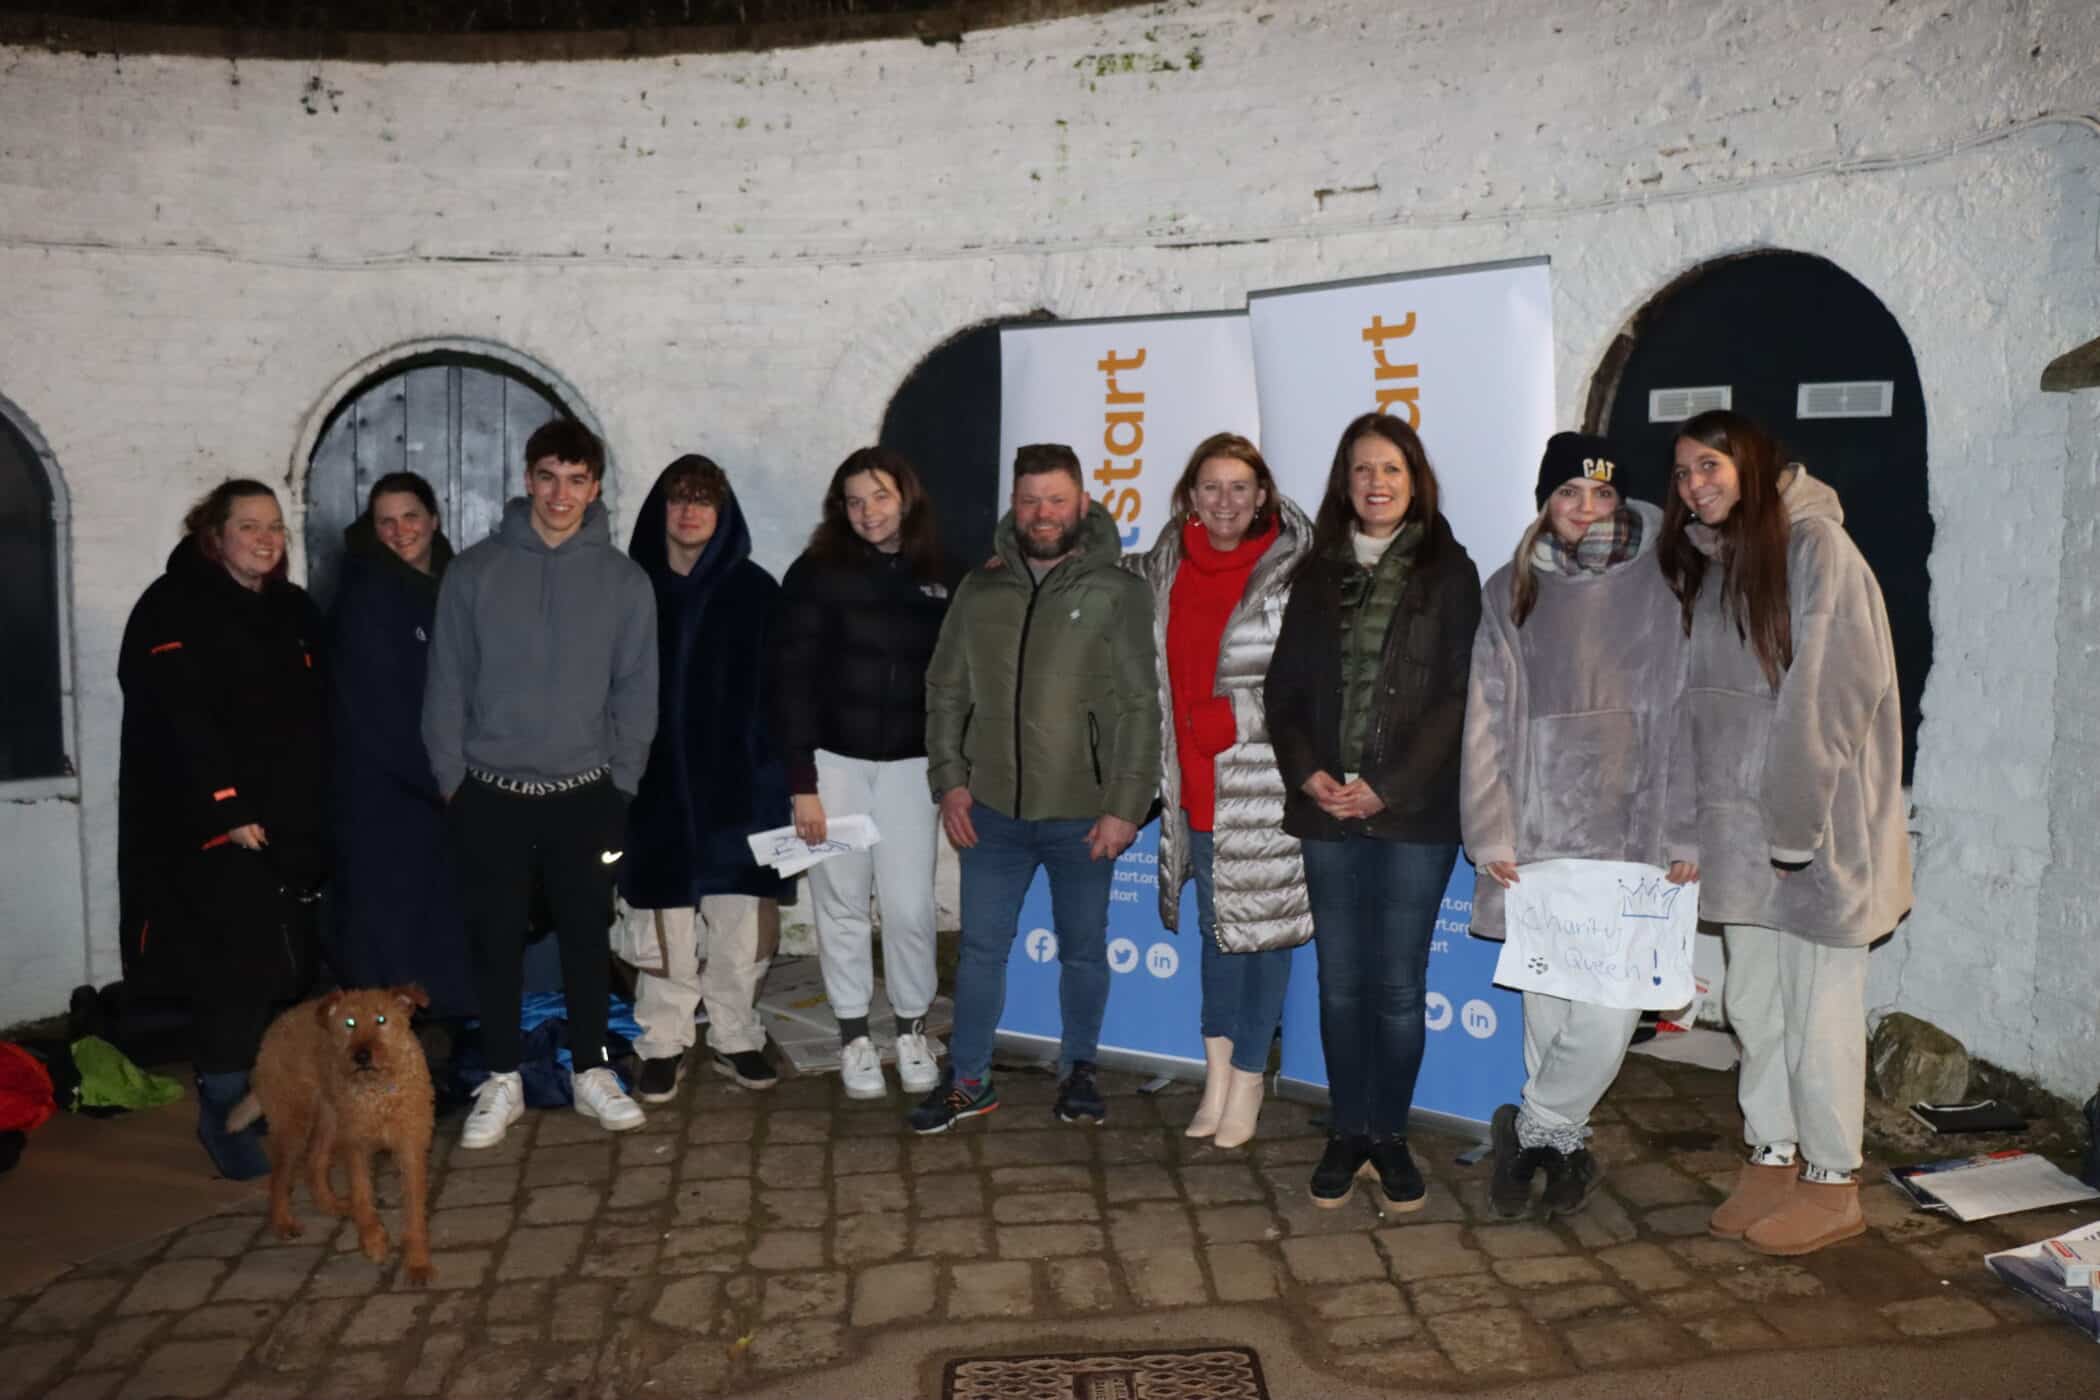 'In Your Area' reports on Claremont's Big Sleep Out